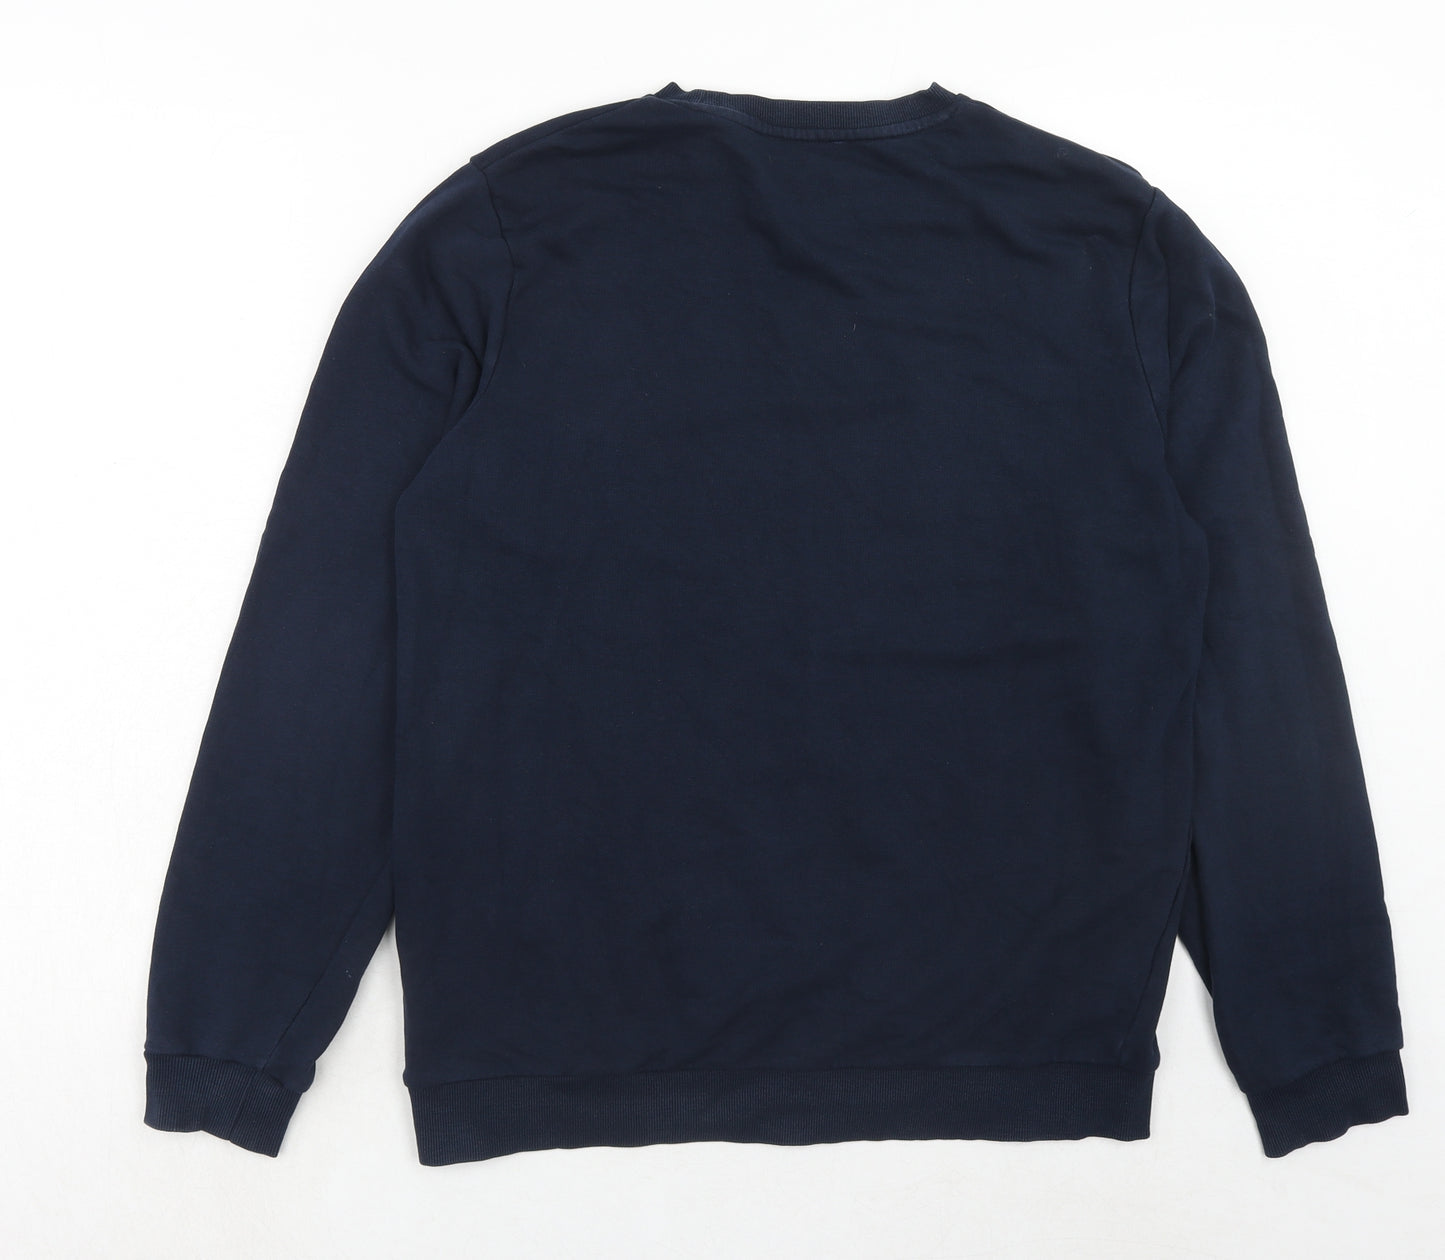 New Look Mens Blue Cotton Pullover Sweatshirt Size S